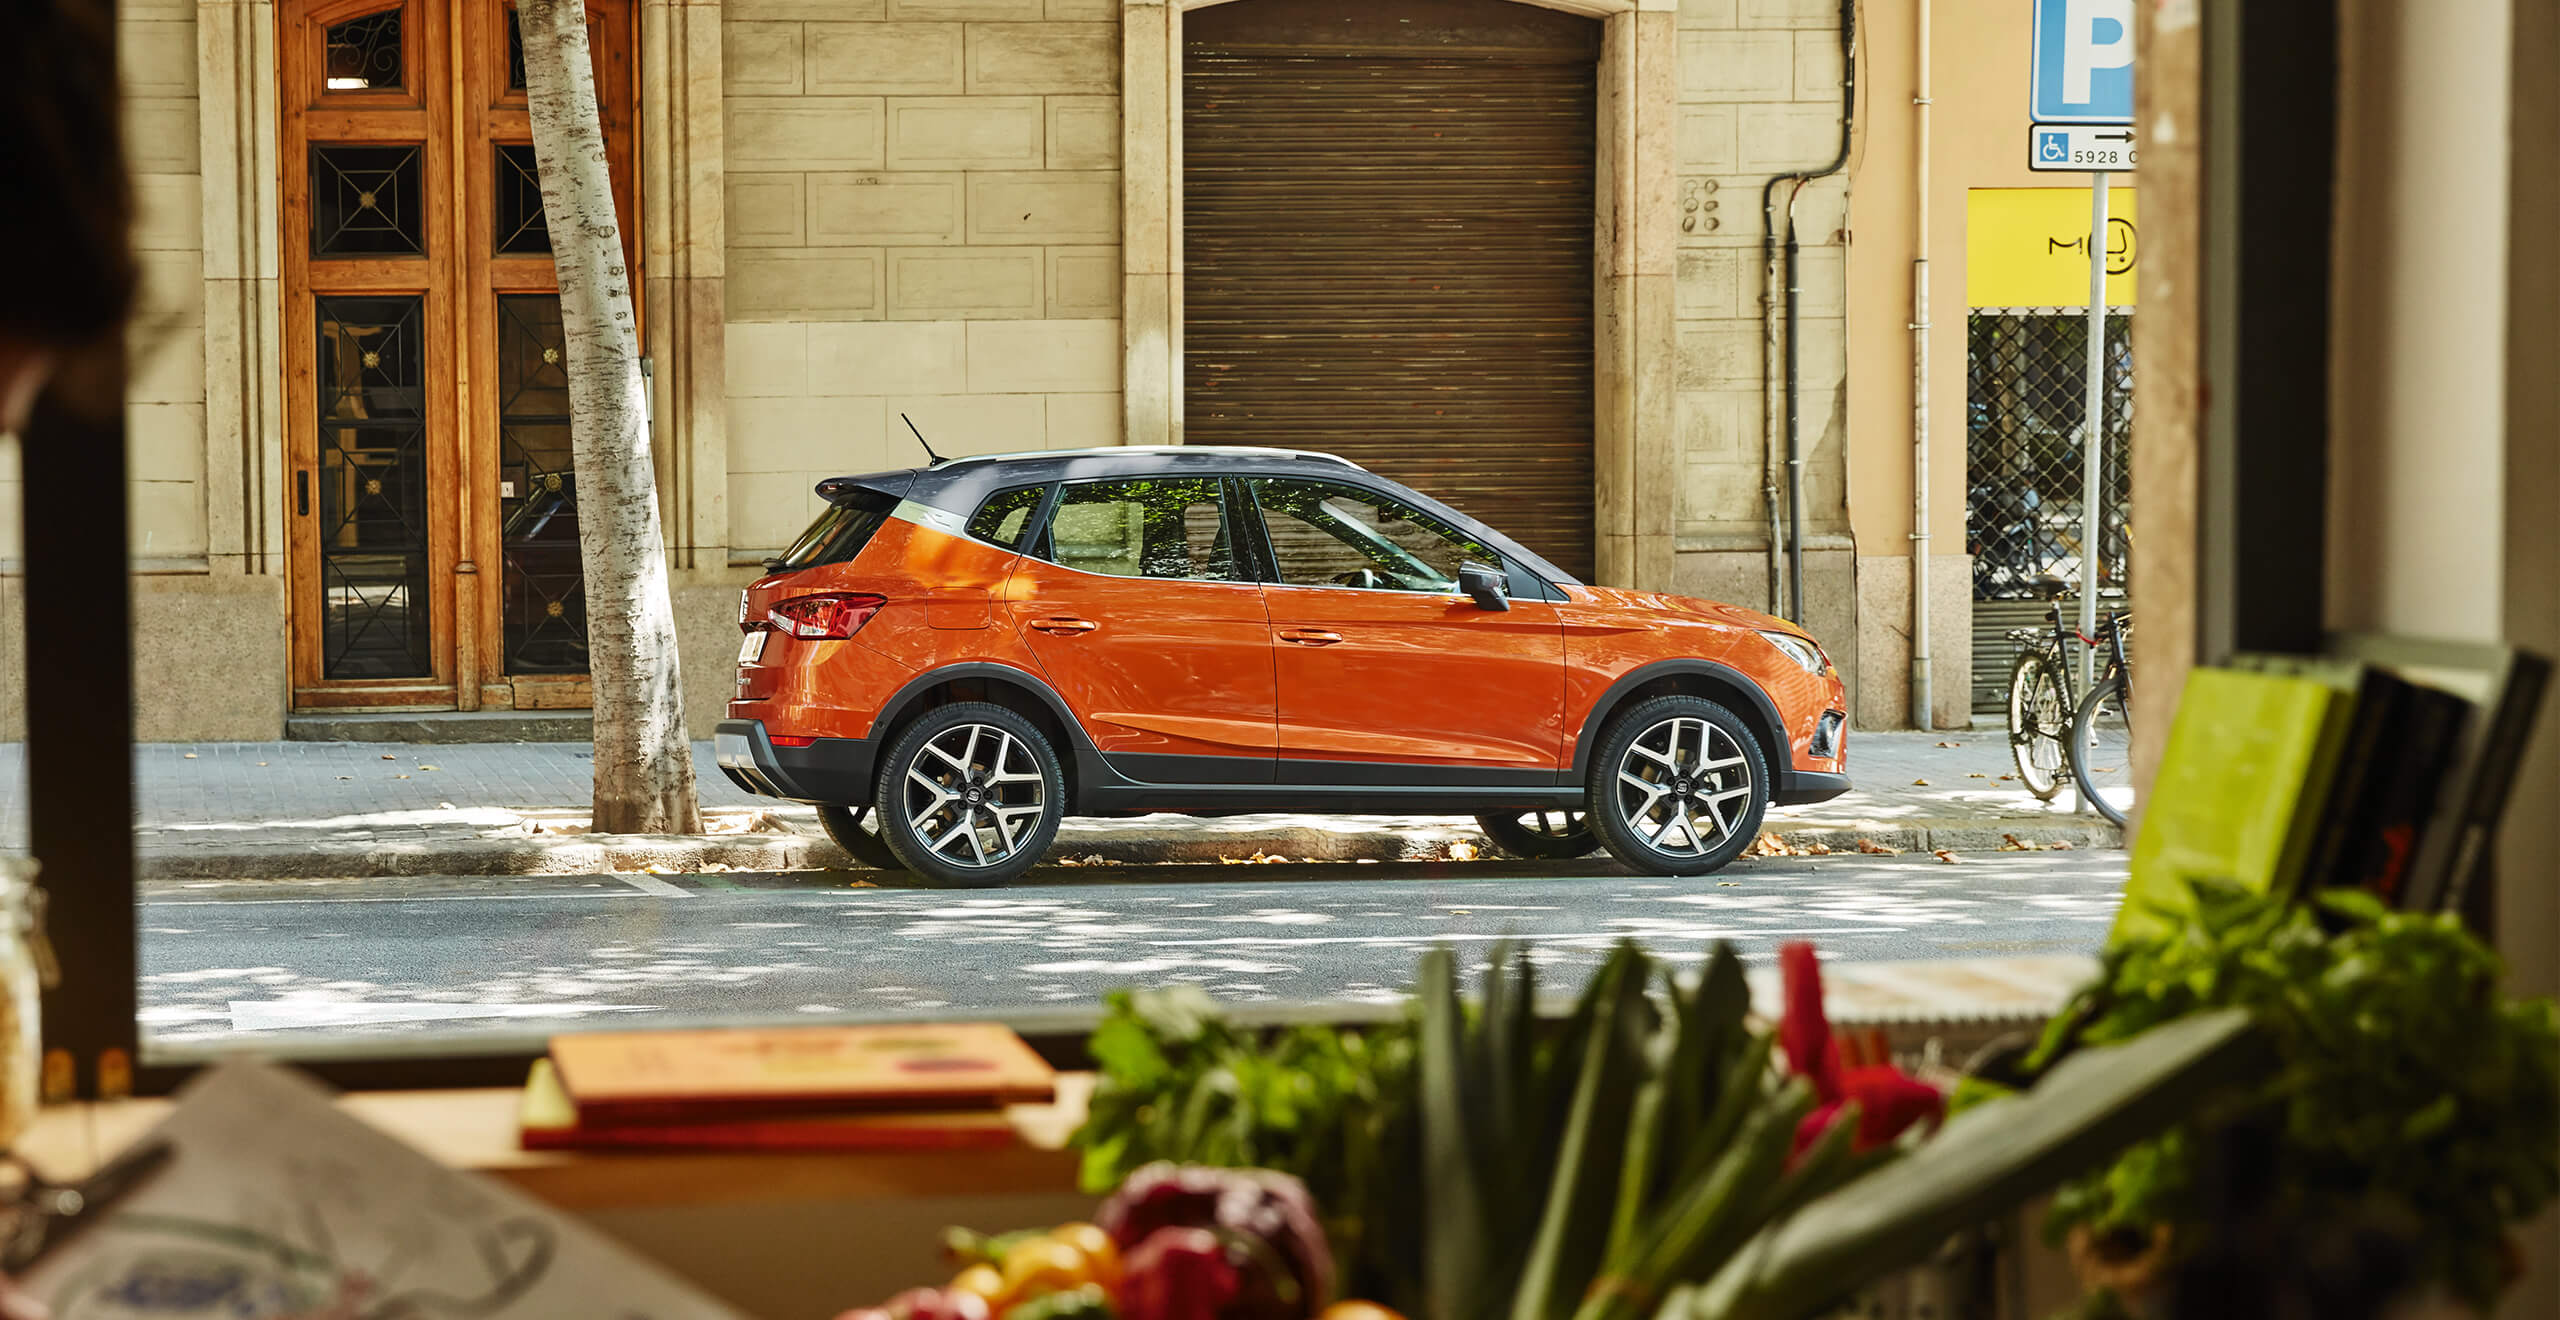 SEAT car pick up and delivery servicing and maintenance – View from inside a vegetable shop with a SEAT Arona crossover SUV seen outside through the window